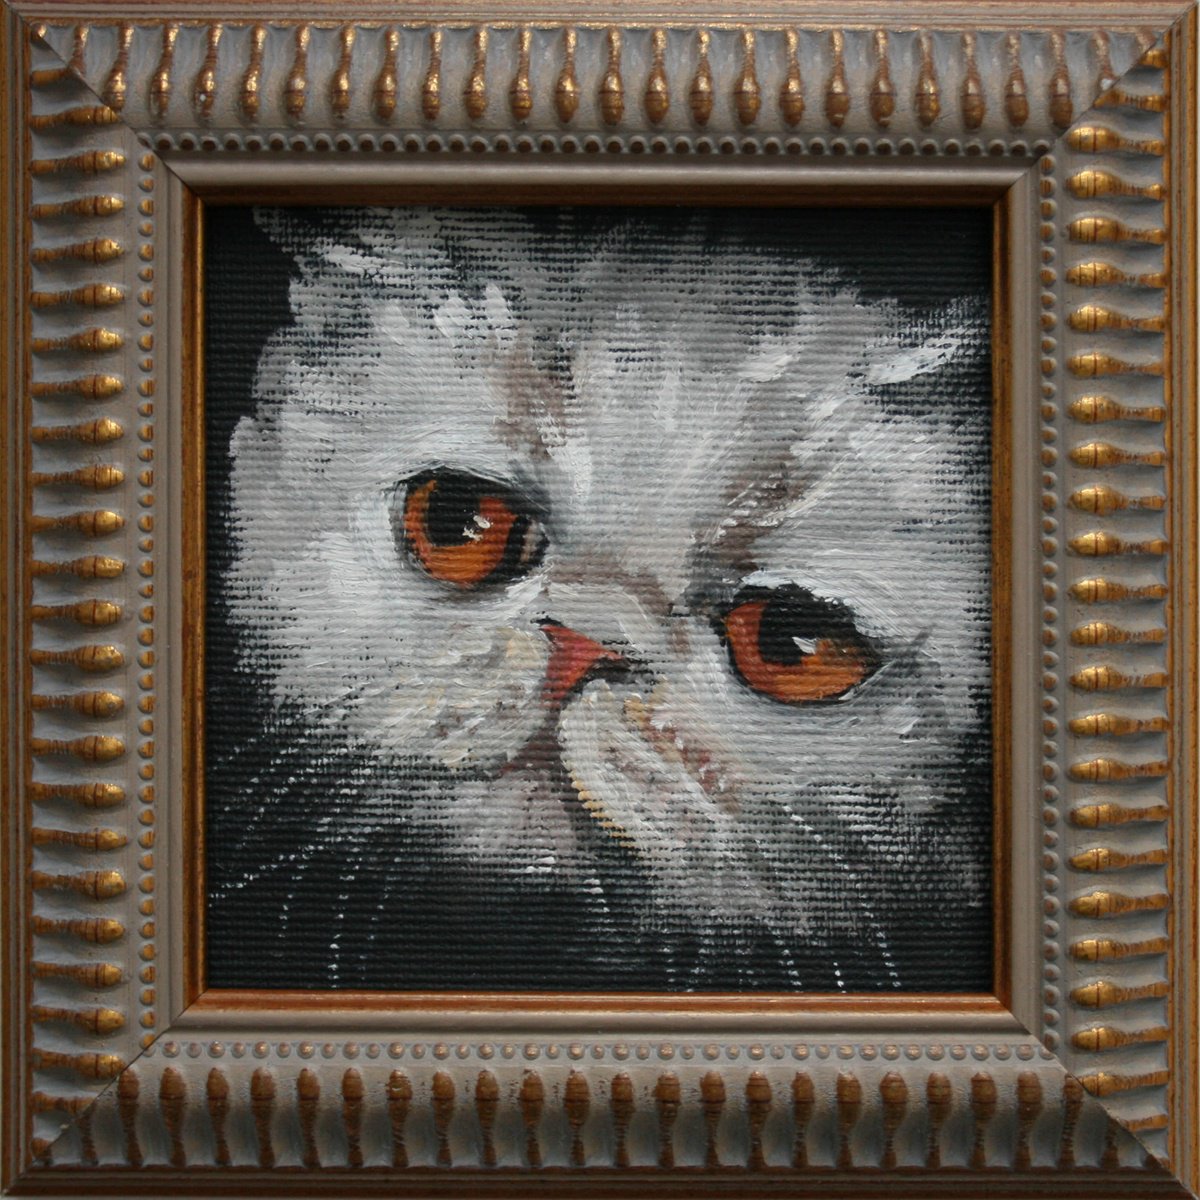 CAT VI framed / FROM MY A SERIES OF MINI WORKS CATS/ ORIGINAL OIL PAINTING by Salana Art Gallery